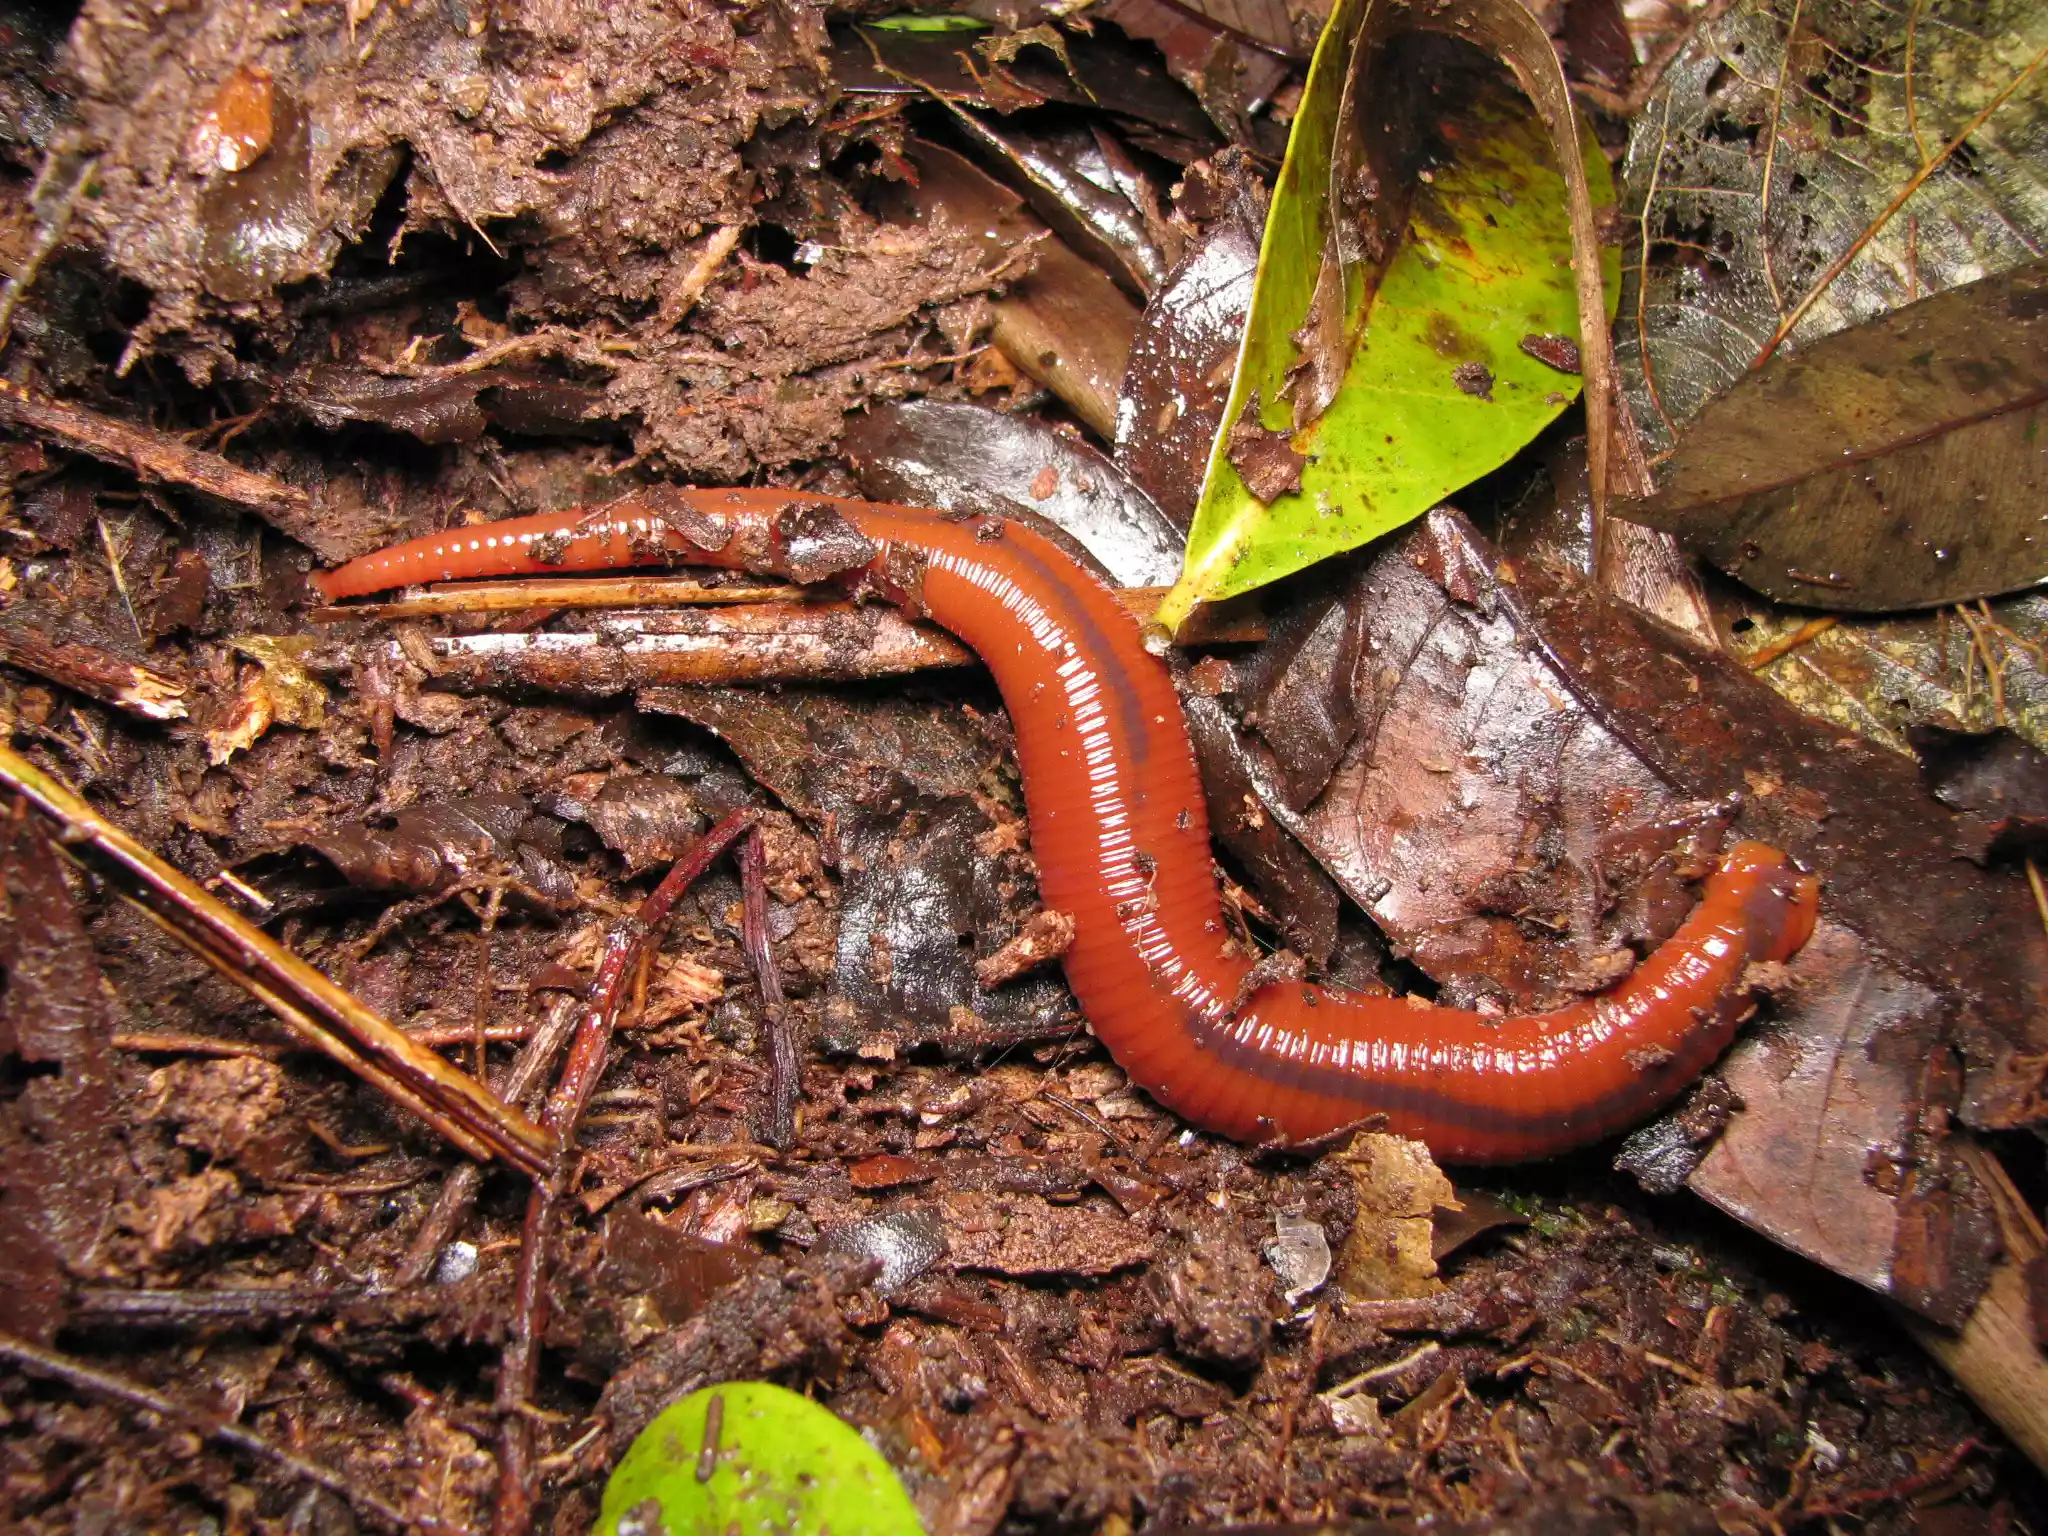 A red leech on a forest floor